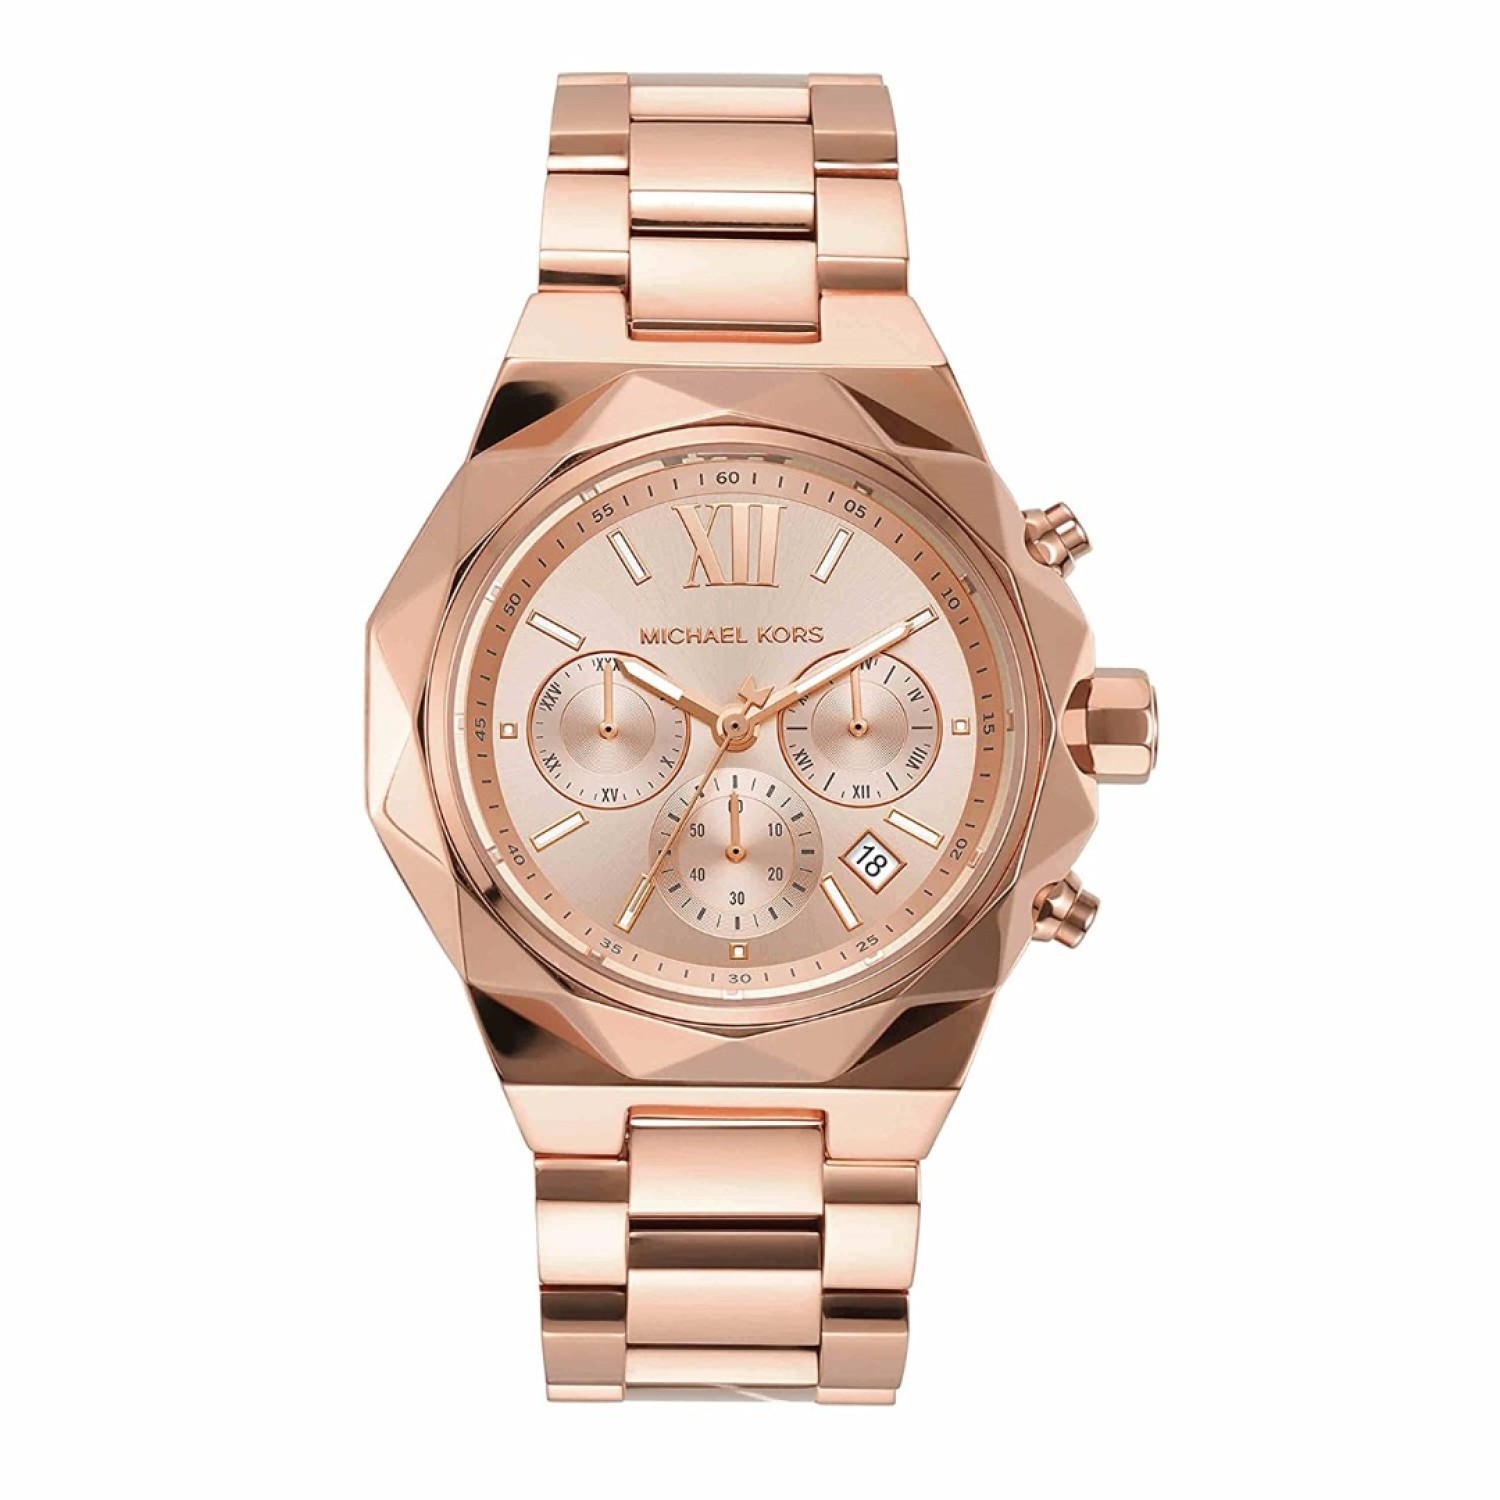 MK4688 Michael Kors Raquel Chronograph Rose Tone Watch. The Raquel MK4688 is a stunning timepiece that combines functionality with sophisticated style.